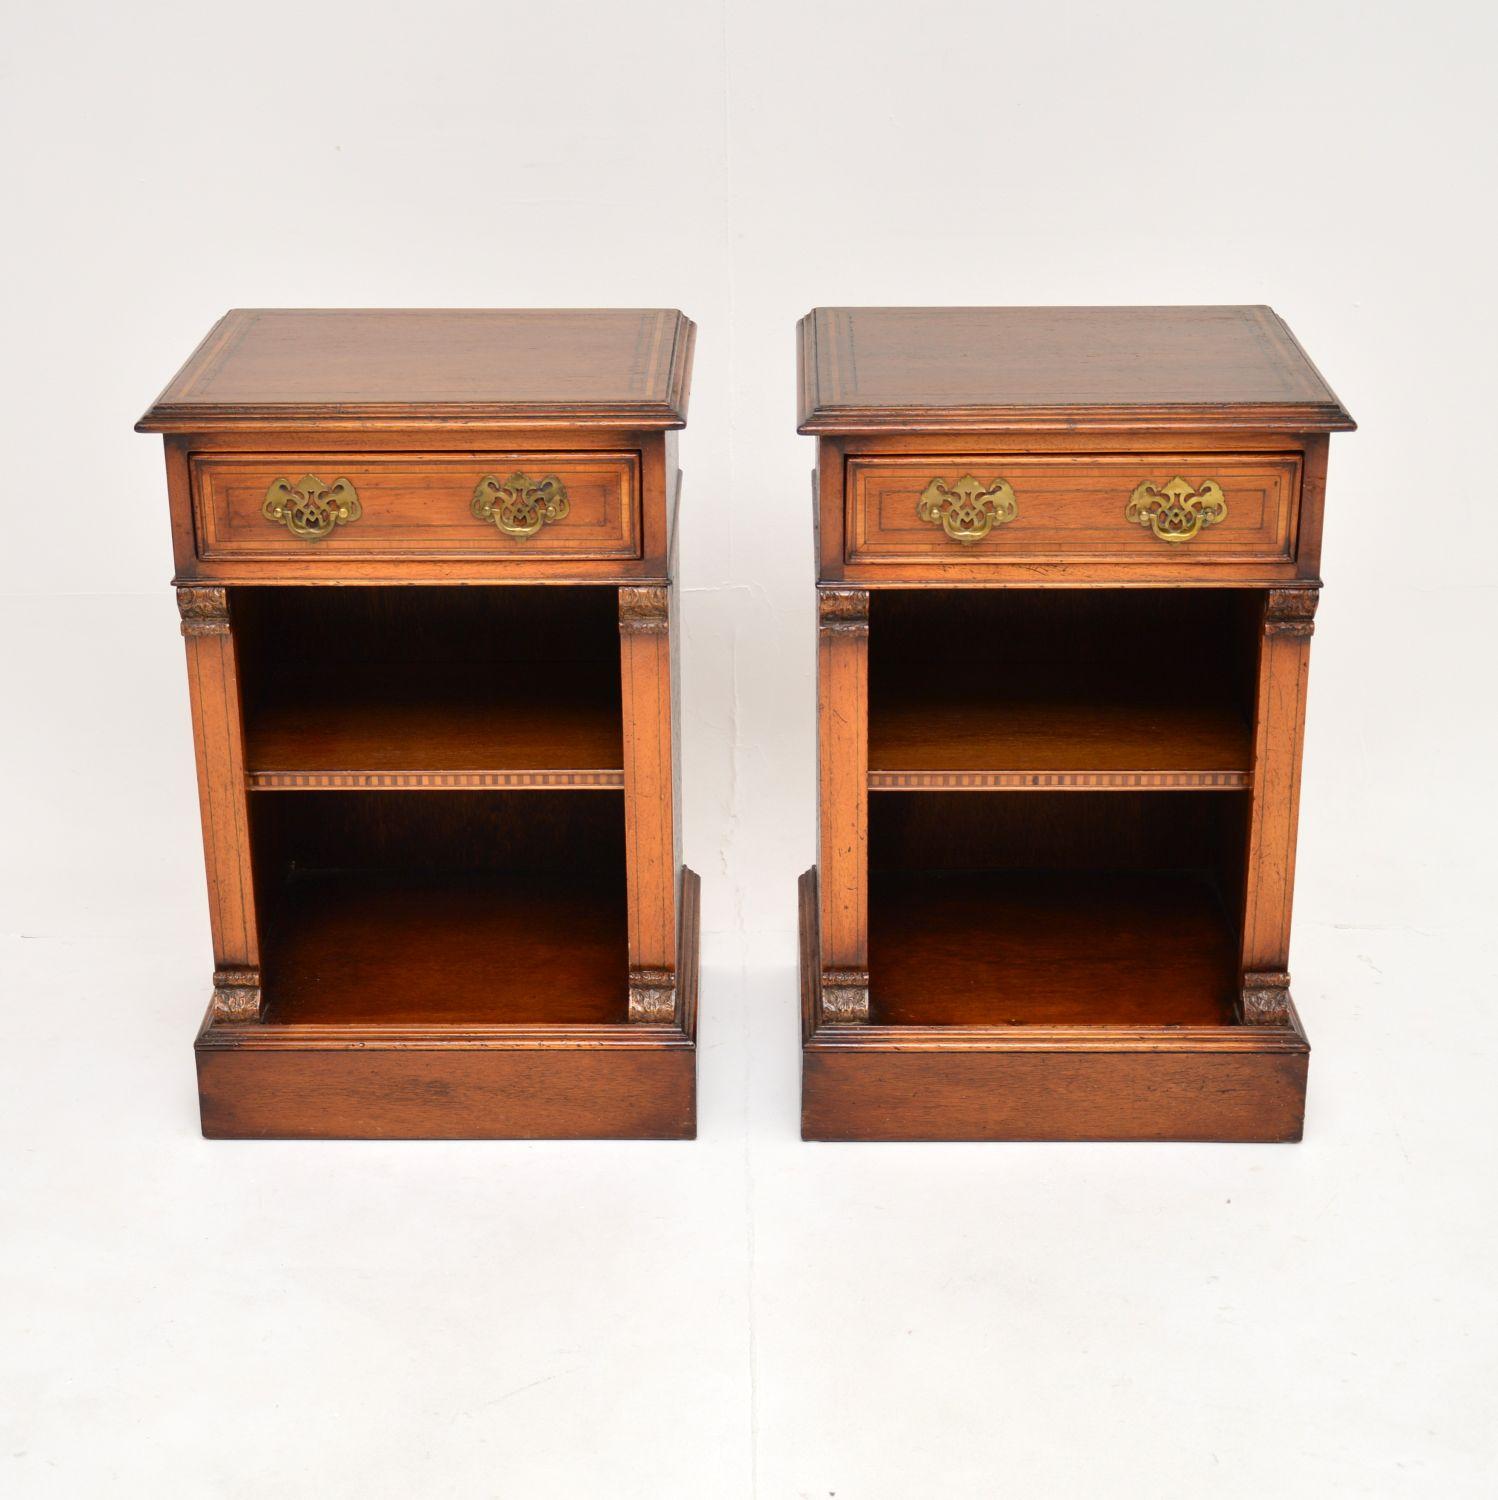 A fantastic pair of antique inlaid bedside cabinets. They were made in England, they date from around the 1950’s.

The quality is superb, each has a single drawer at the top with brass handles and an open recess at the bottom with a single shelf.